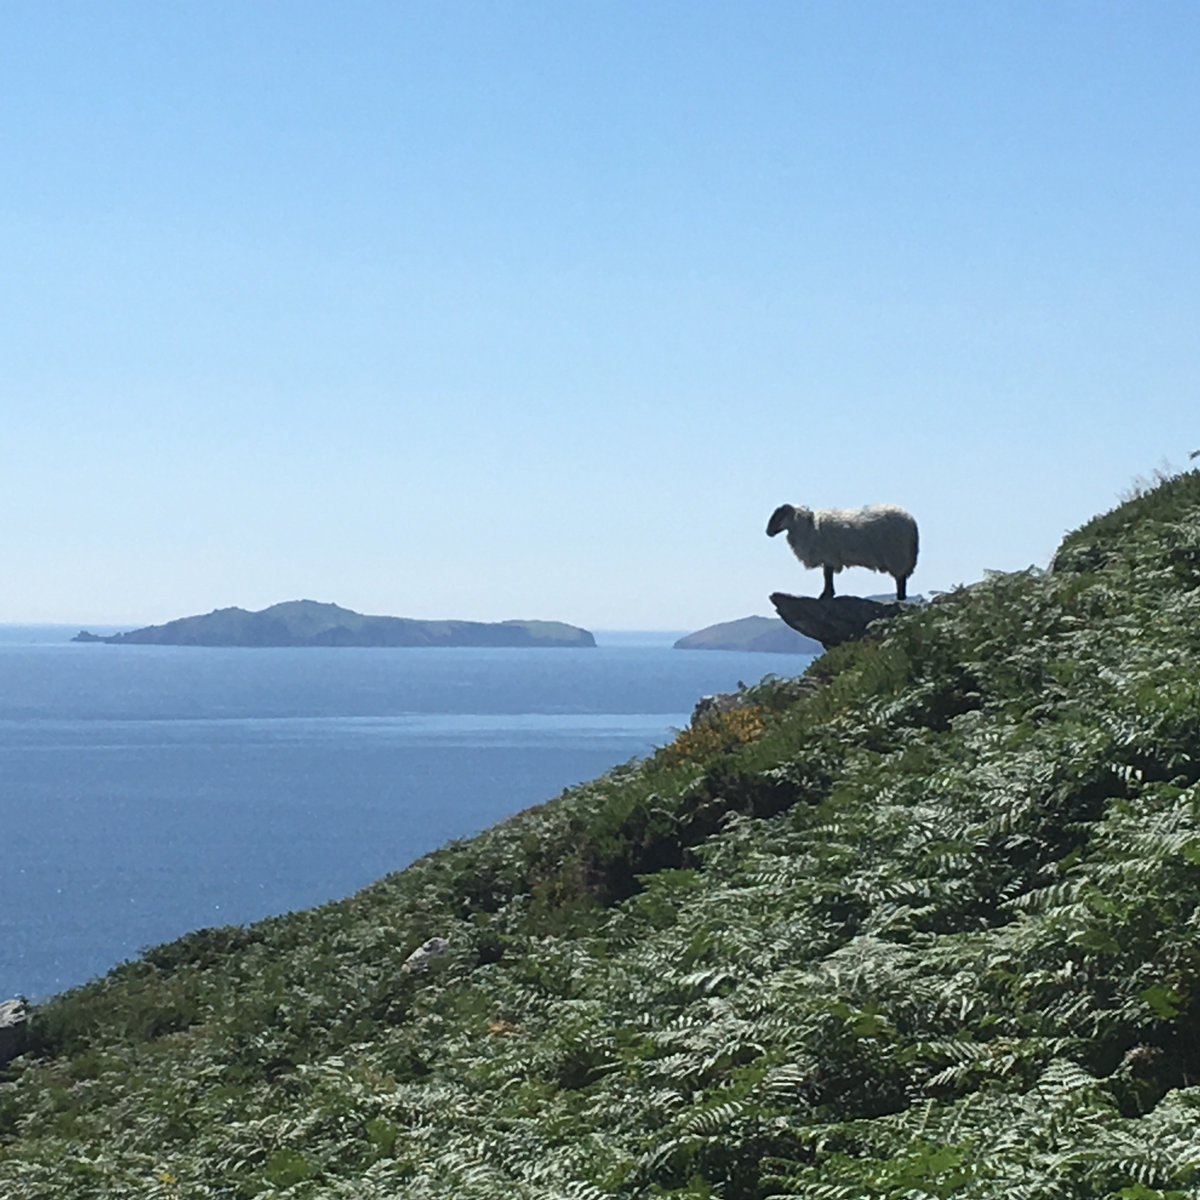 Brand new Patron of the #TriforcePodcast. Long time listener/Yognaught but absolute virgin Patron. Listening on a hike in #DingleBay Ireland where this sheep is begging for a gravity jugging @YogscastLewis @PyrionFlax @Sips_